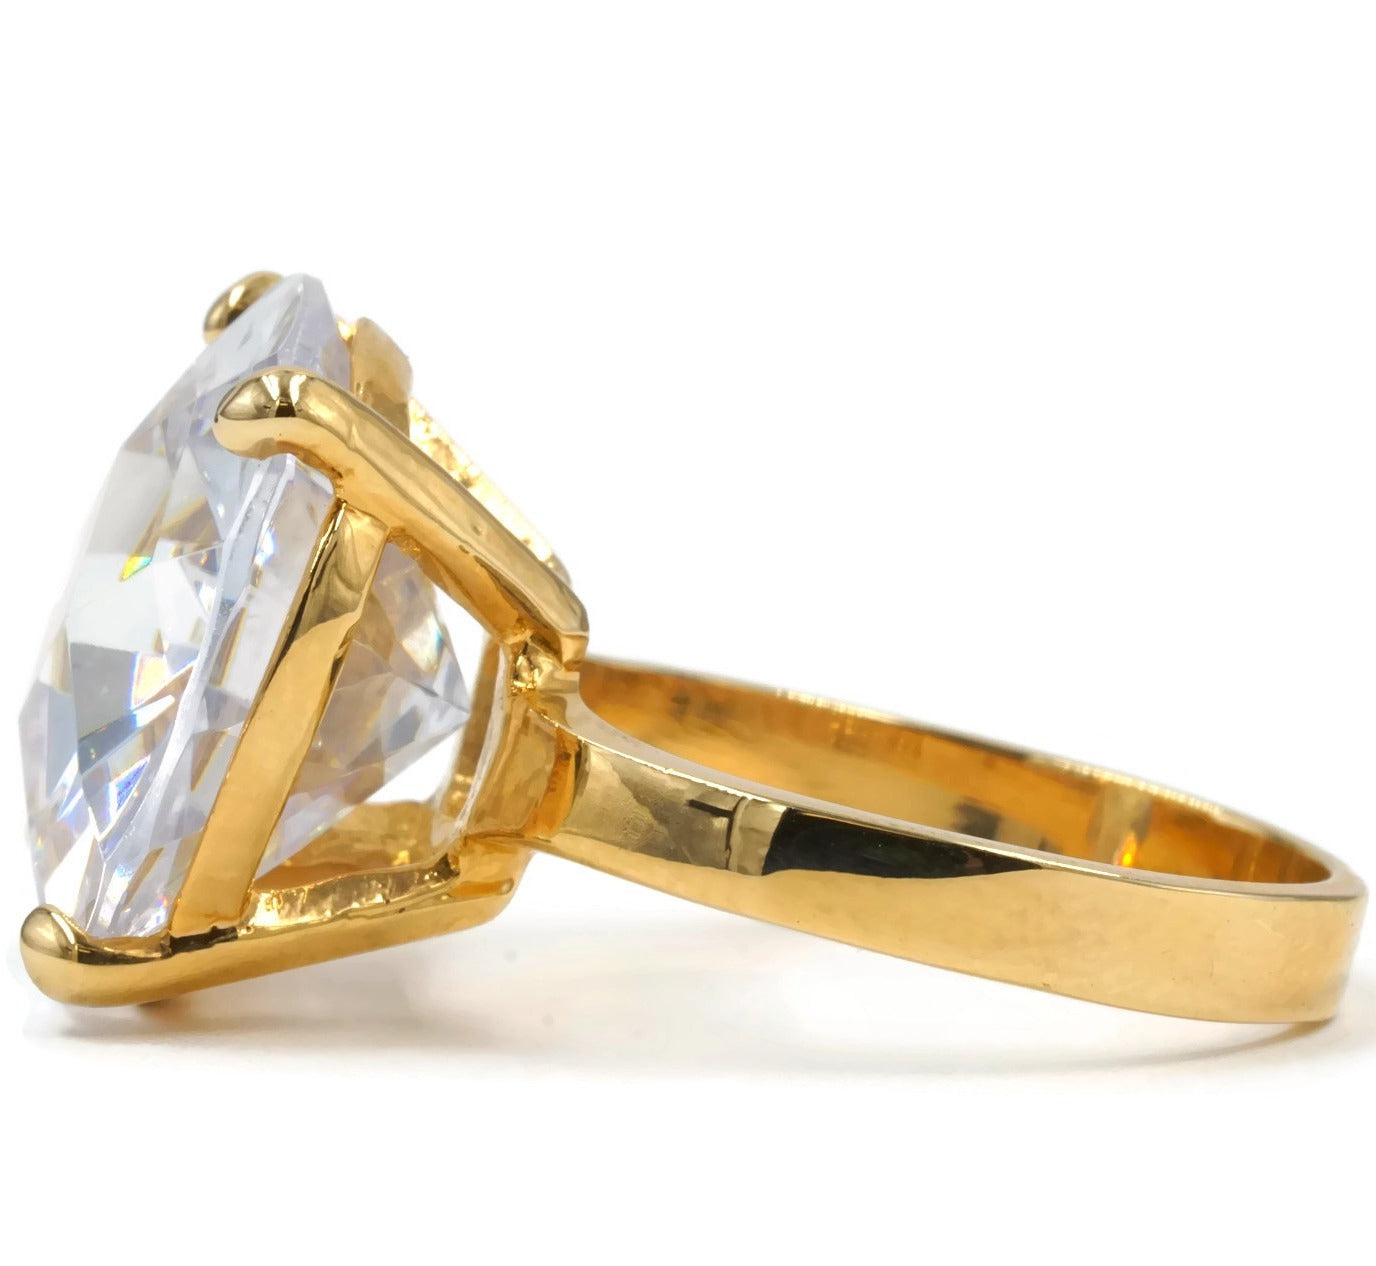 Oversized Gorgeous 14K Gold Plate Cut Solitaire Cocktail Ring